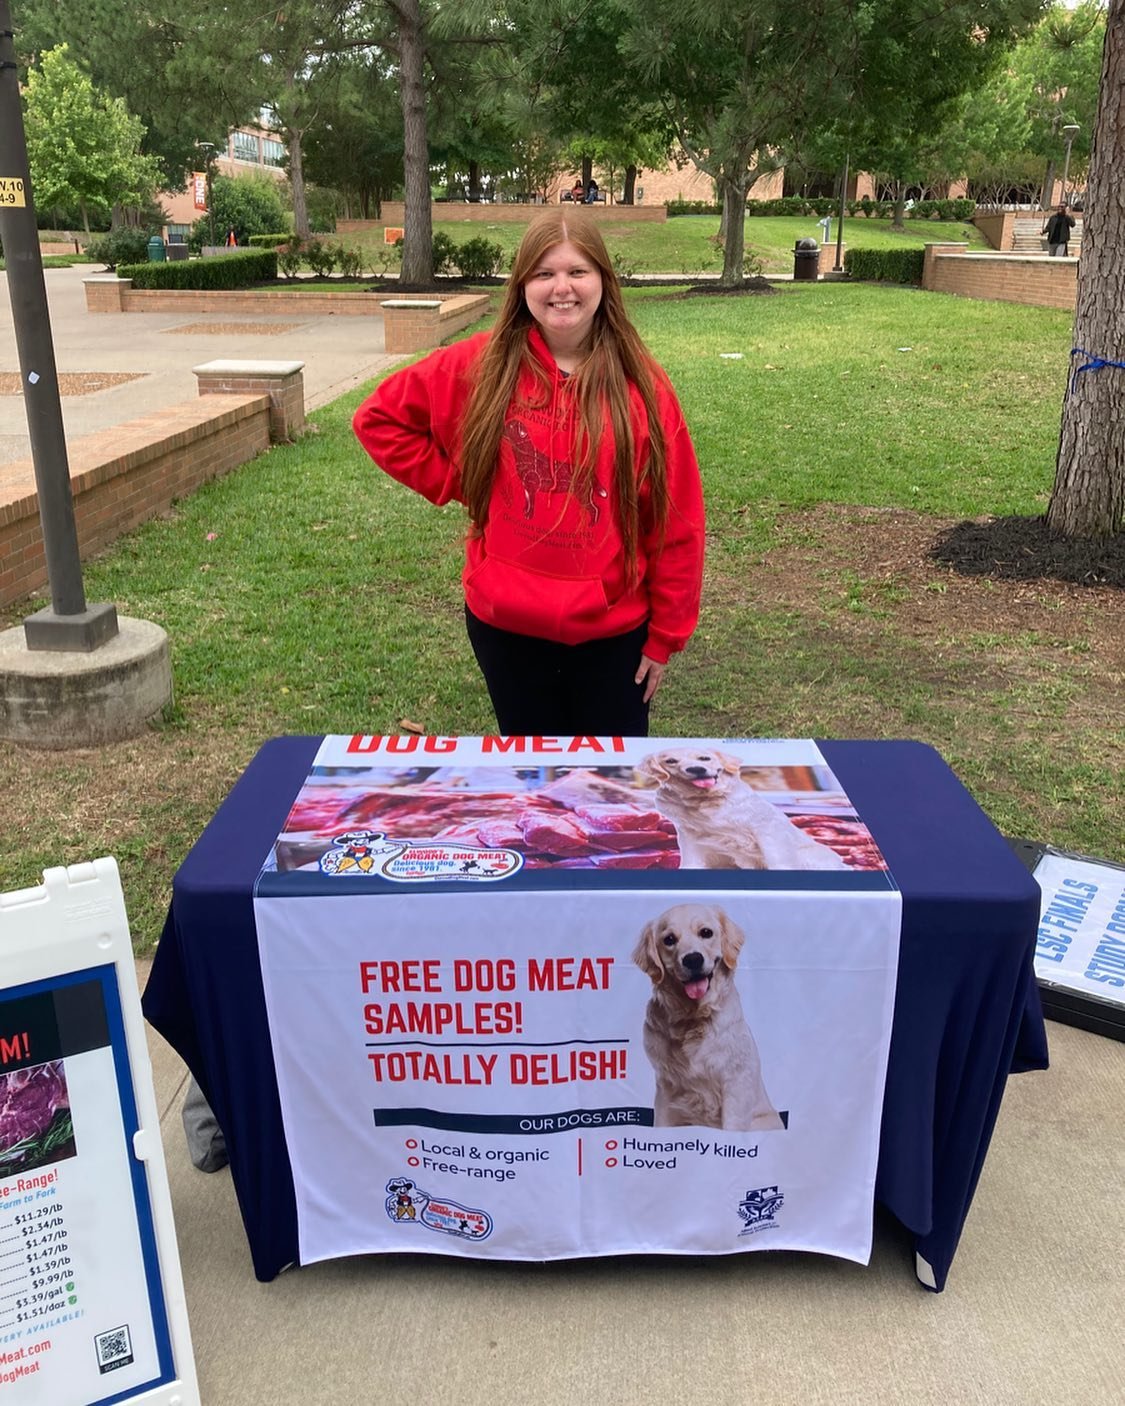 I&rsquo;m so thankful that people stopped by to support their local farmer! #localfarm #localfarmers #animalagriculture #dogmeat #elwooddogmeat #shsu #samhoustonstateuniversity #animals